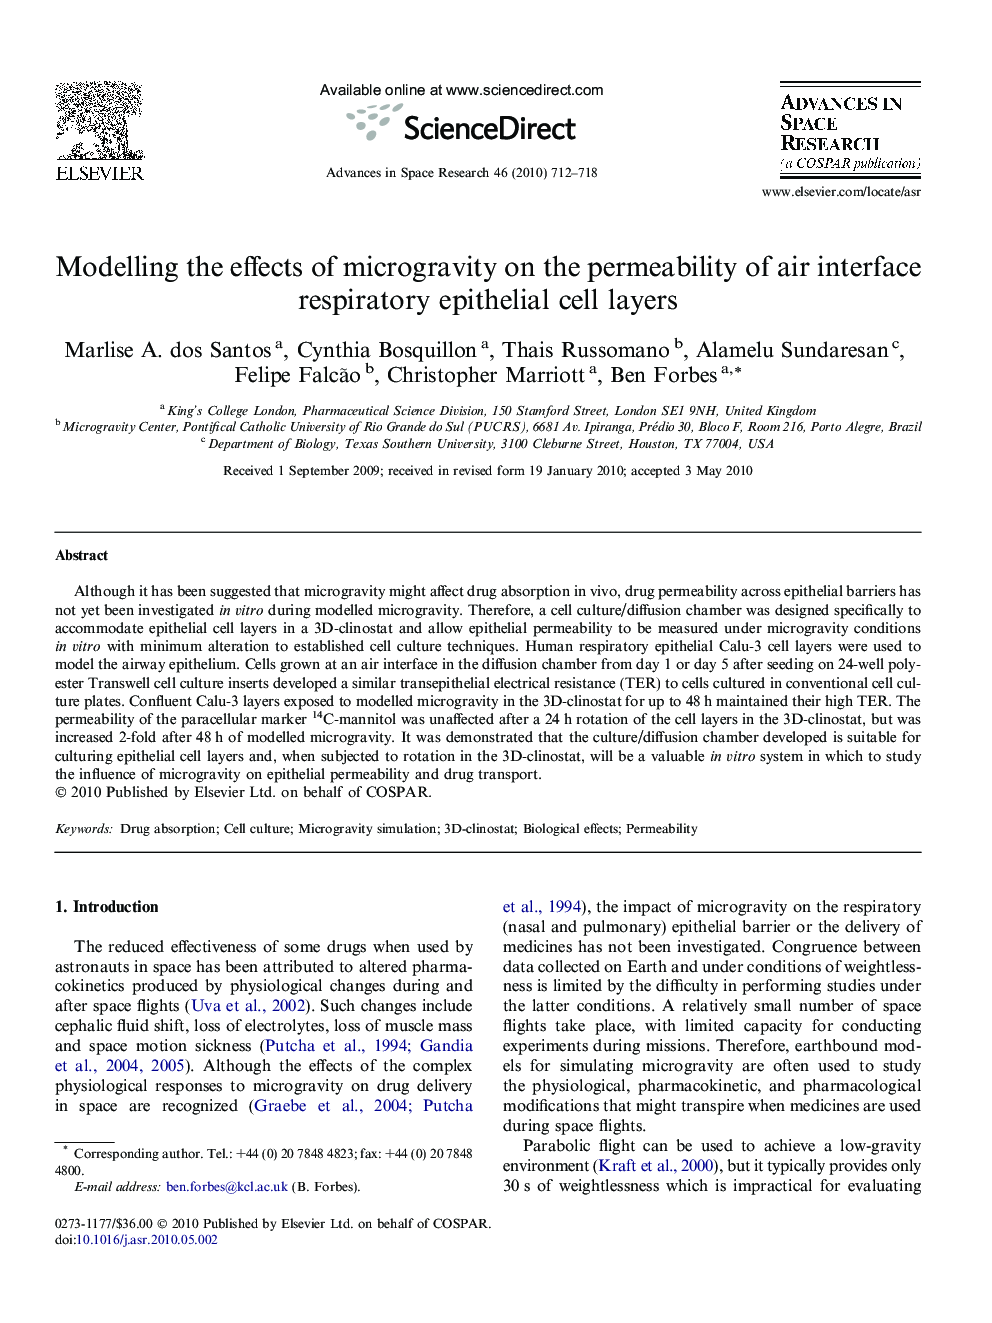 Modelling the effects of microgravity on the permeability of air interface respiratory epithelial cell layers